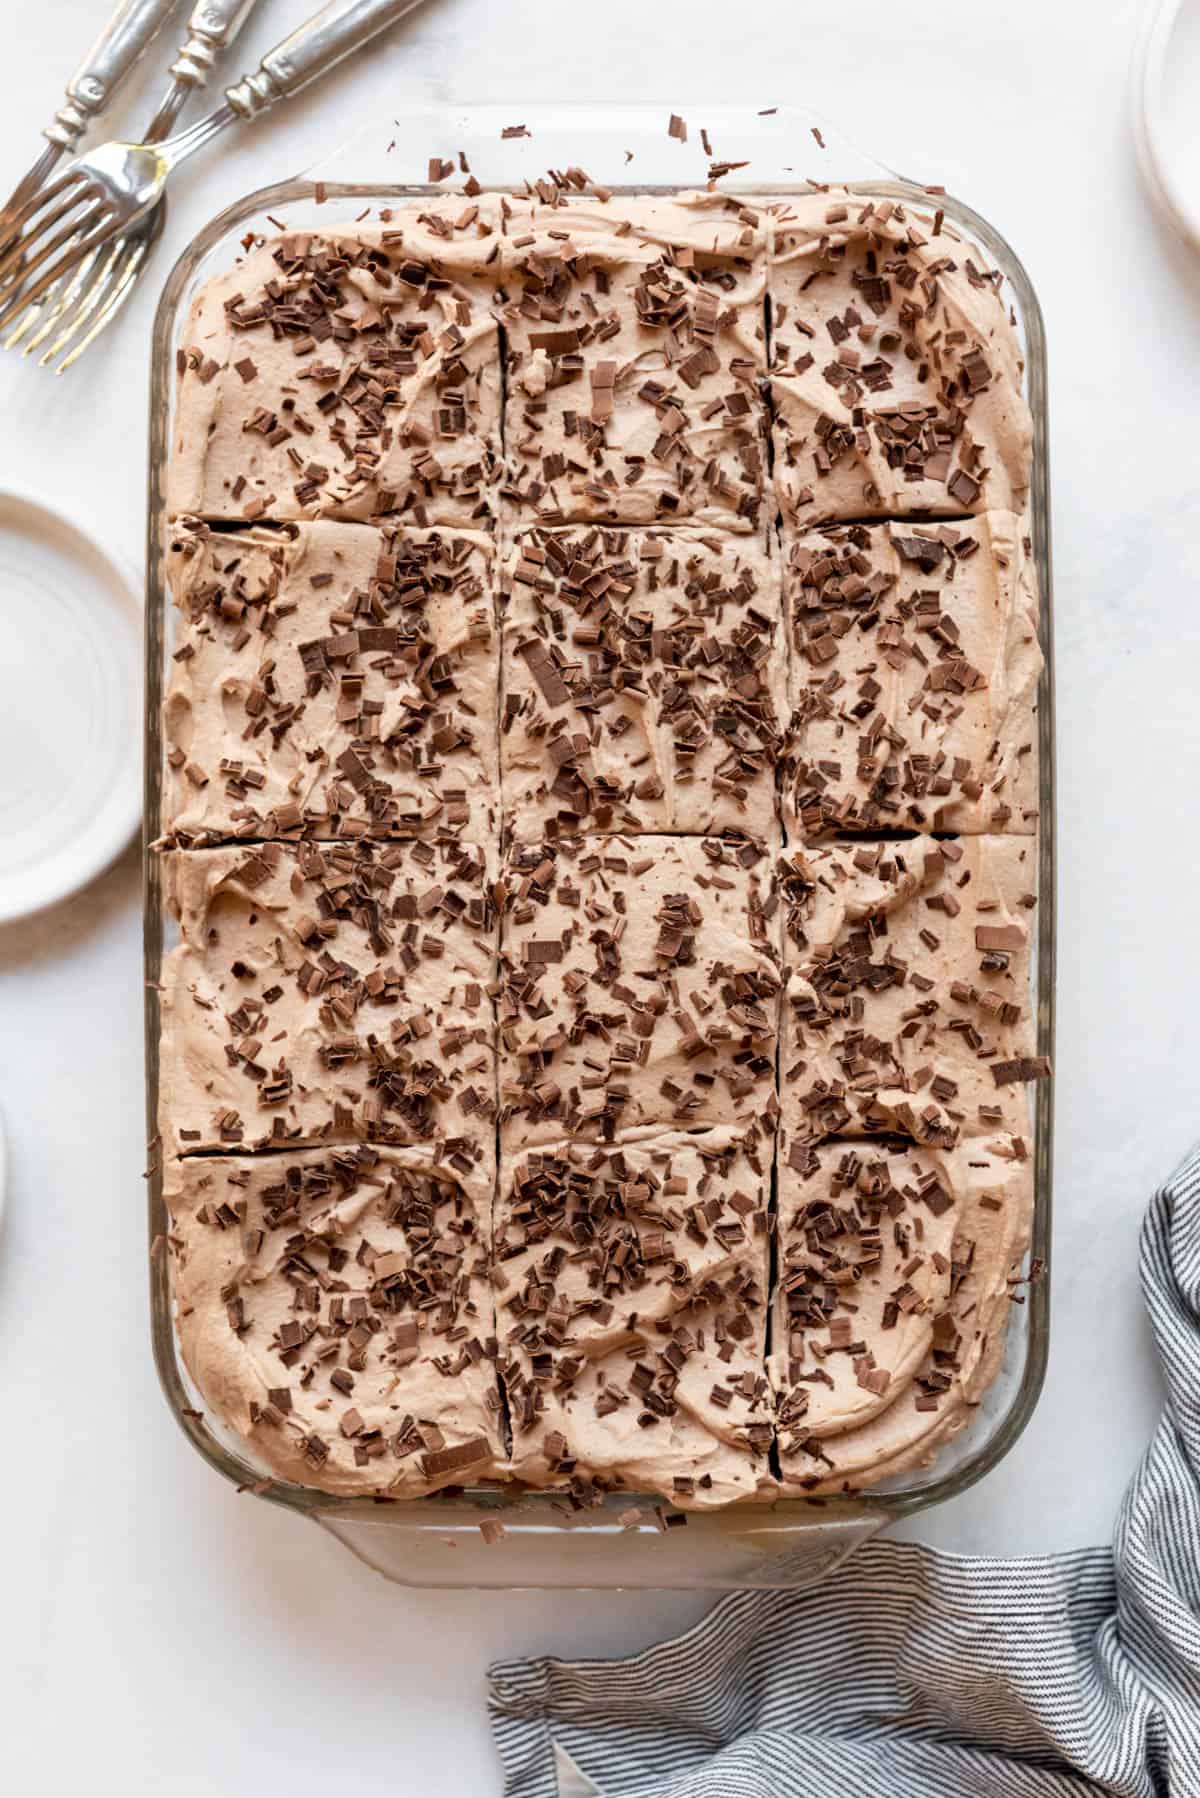 An overhead image of chocolate tres leches cake with shaved chocolate sprinkled on top.